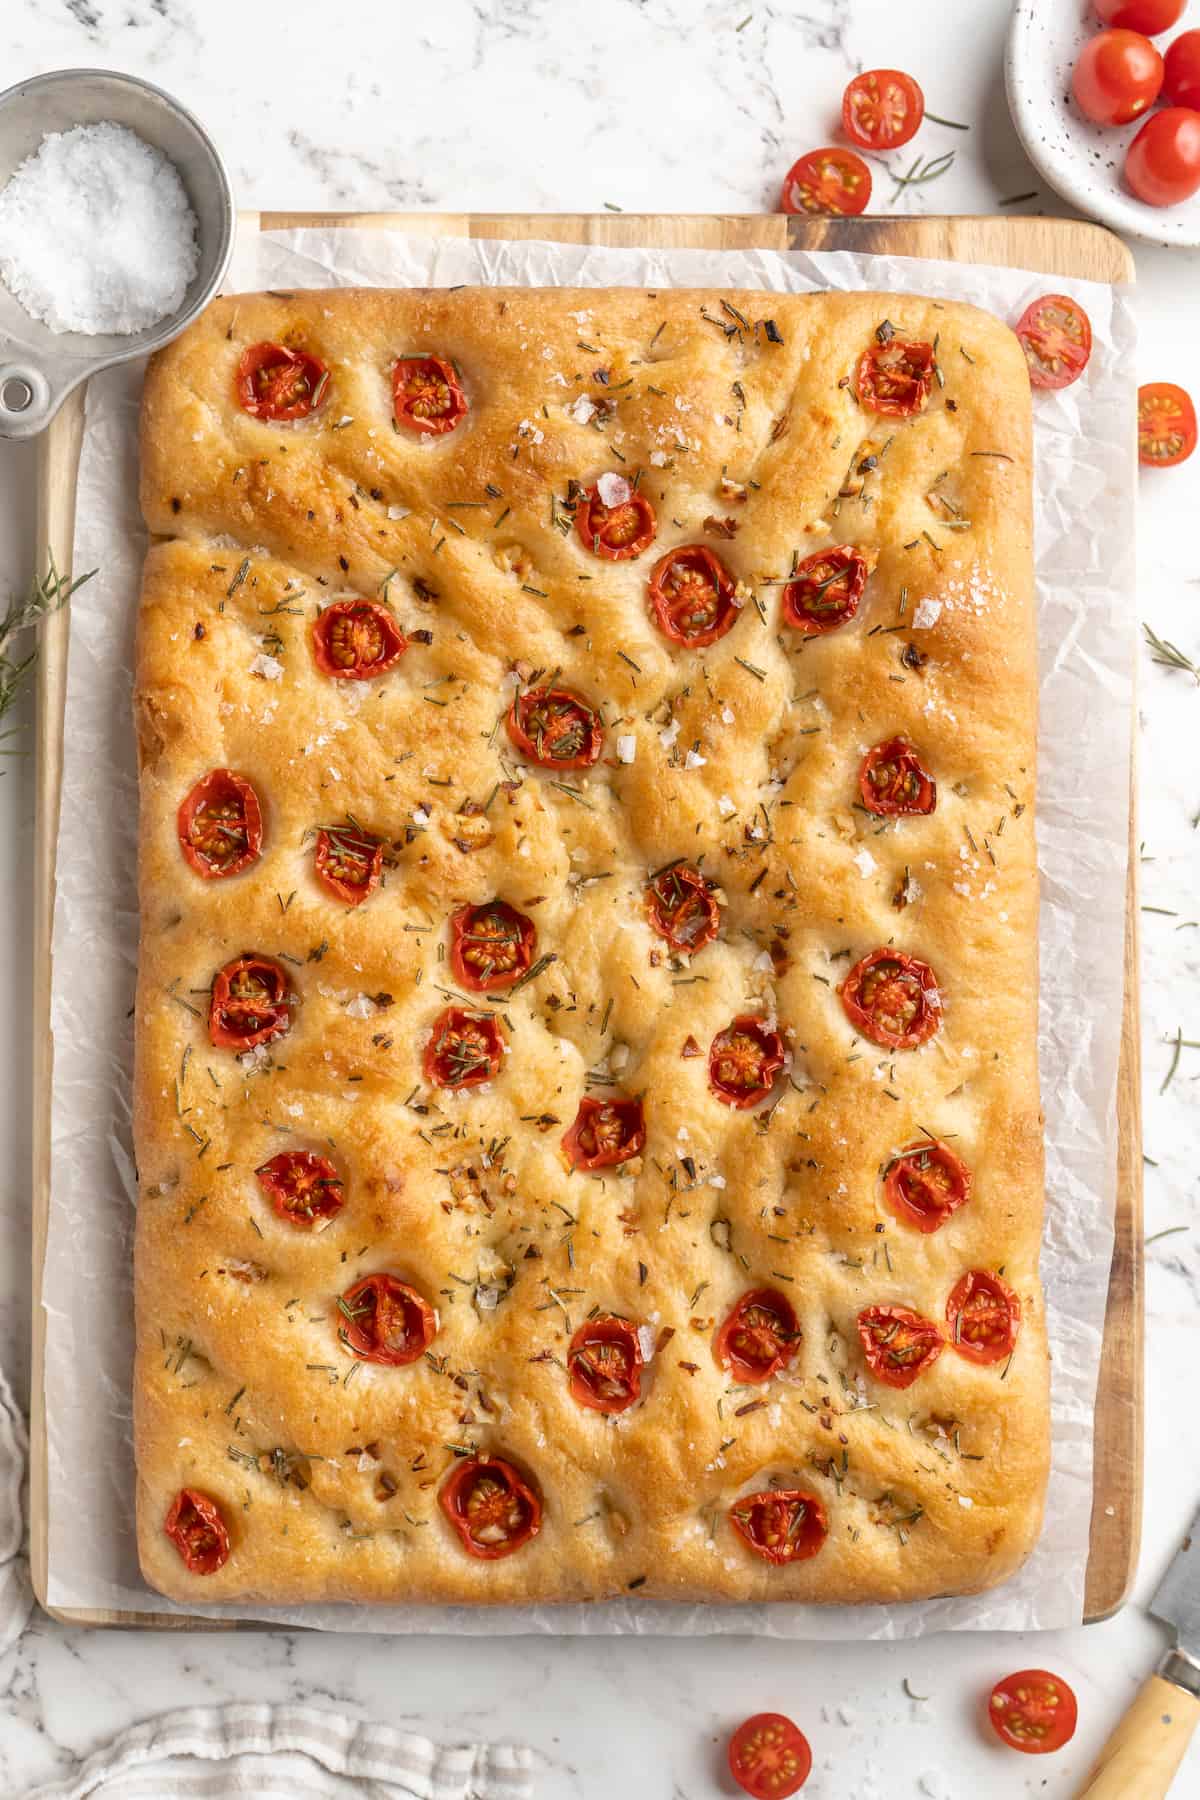 Whole loaf of gluten-free focaccia